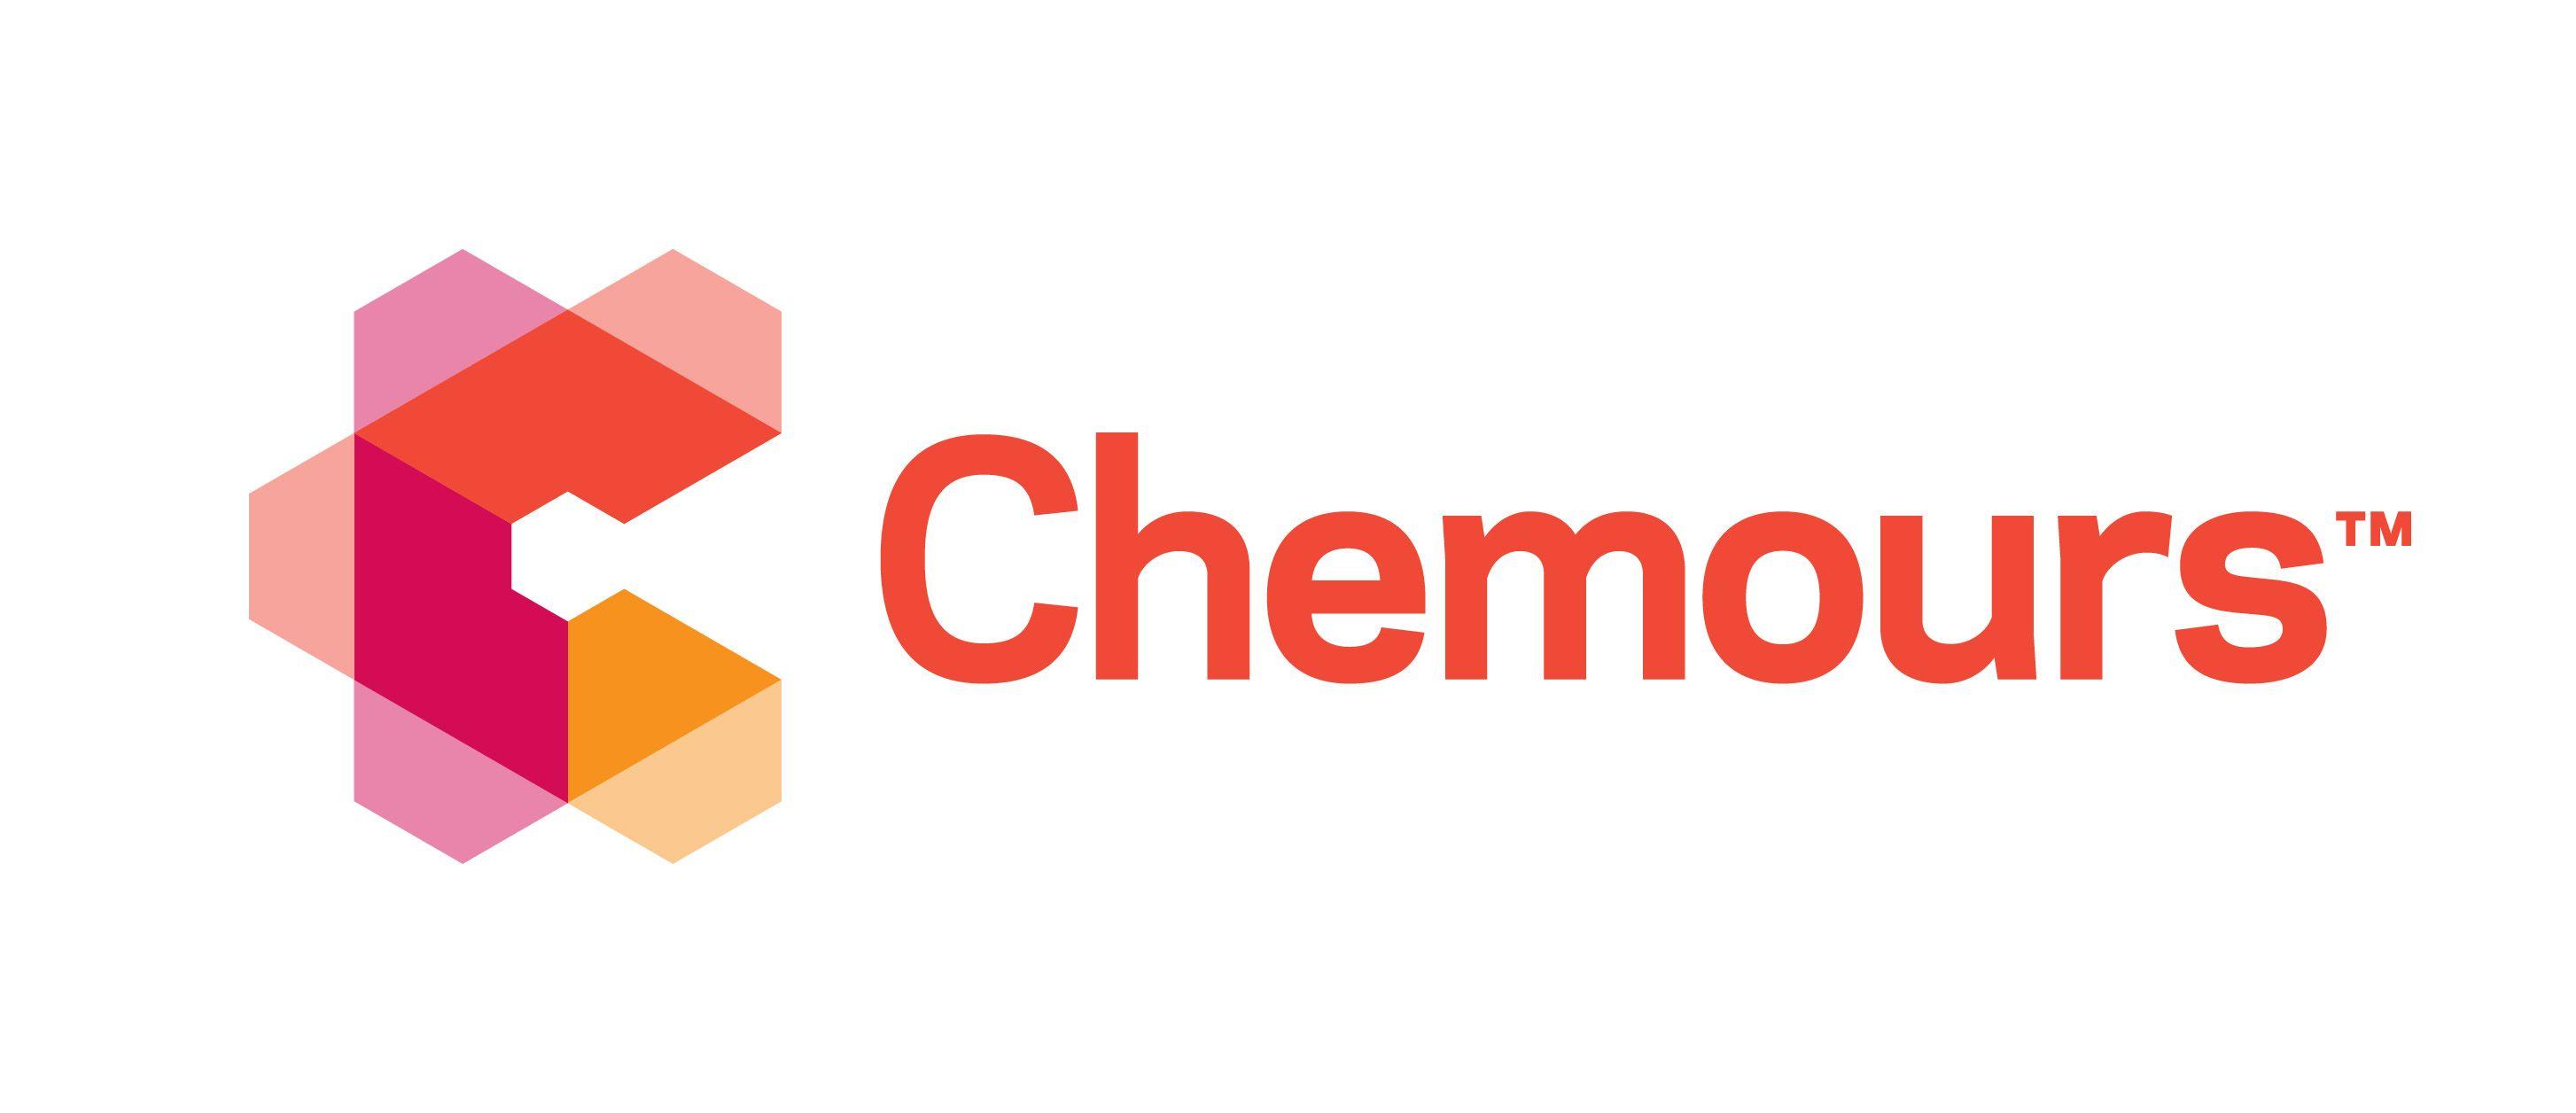 Chemours Logo - The Chemours Company